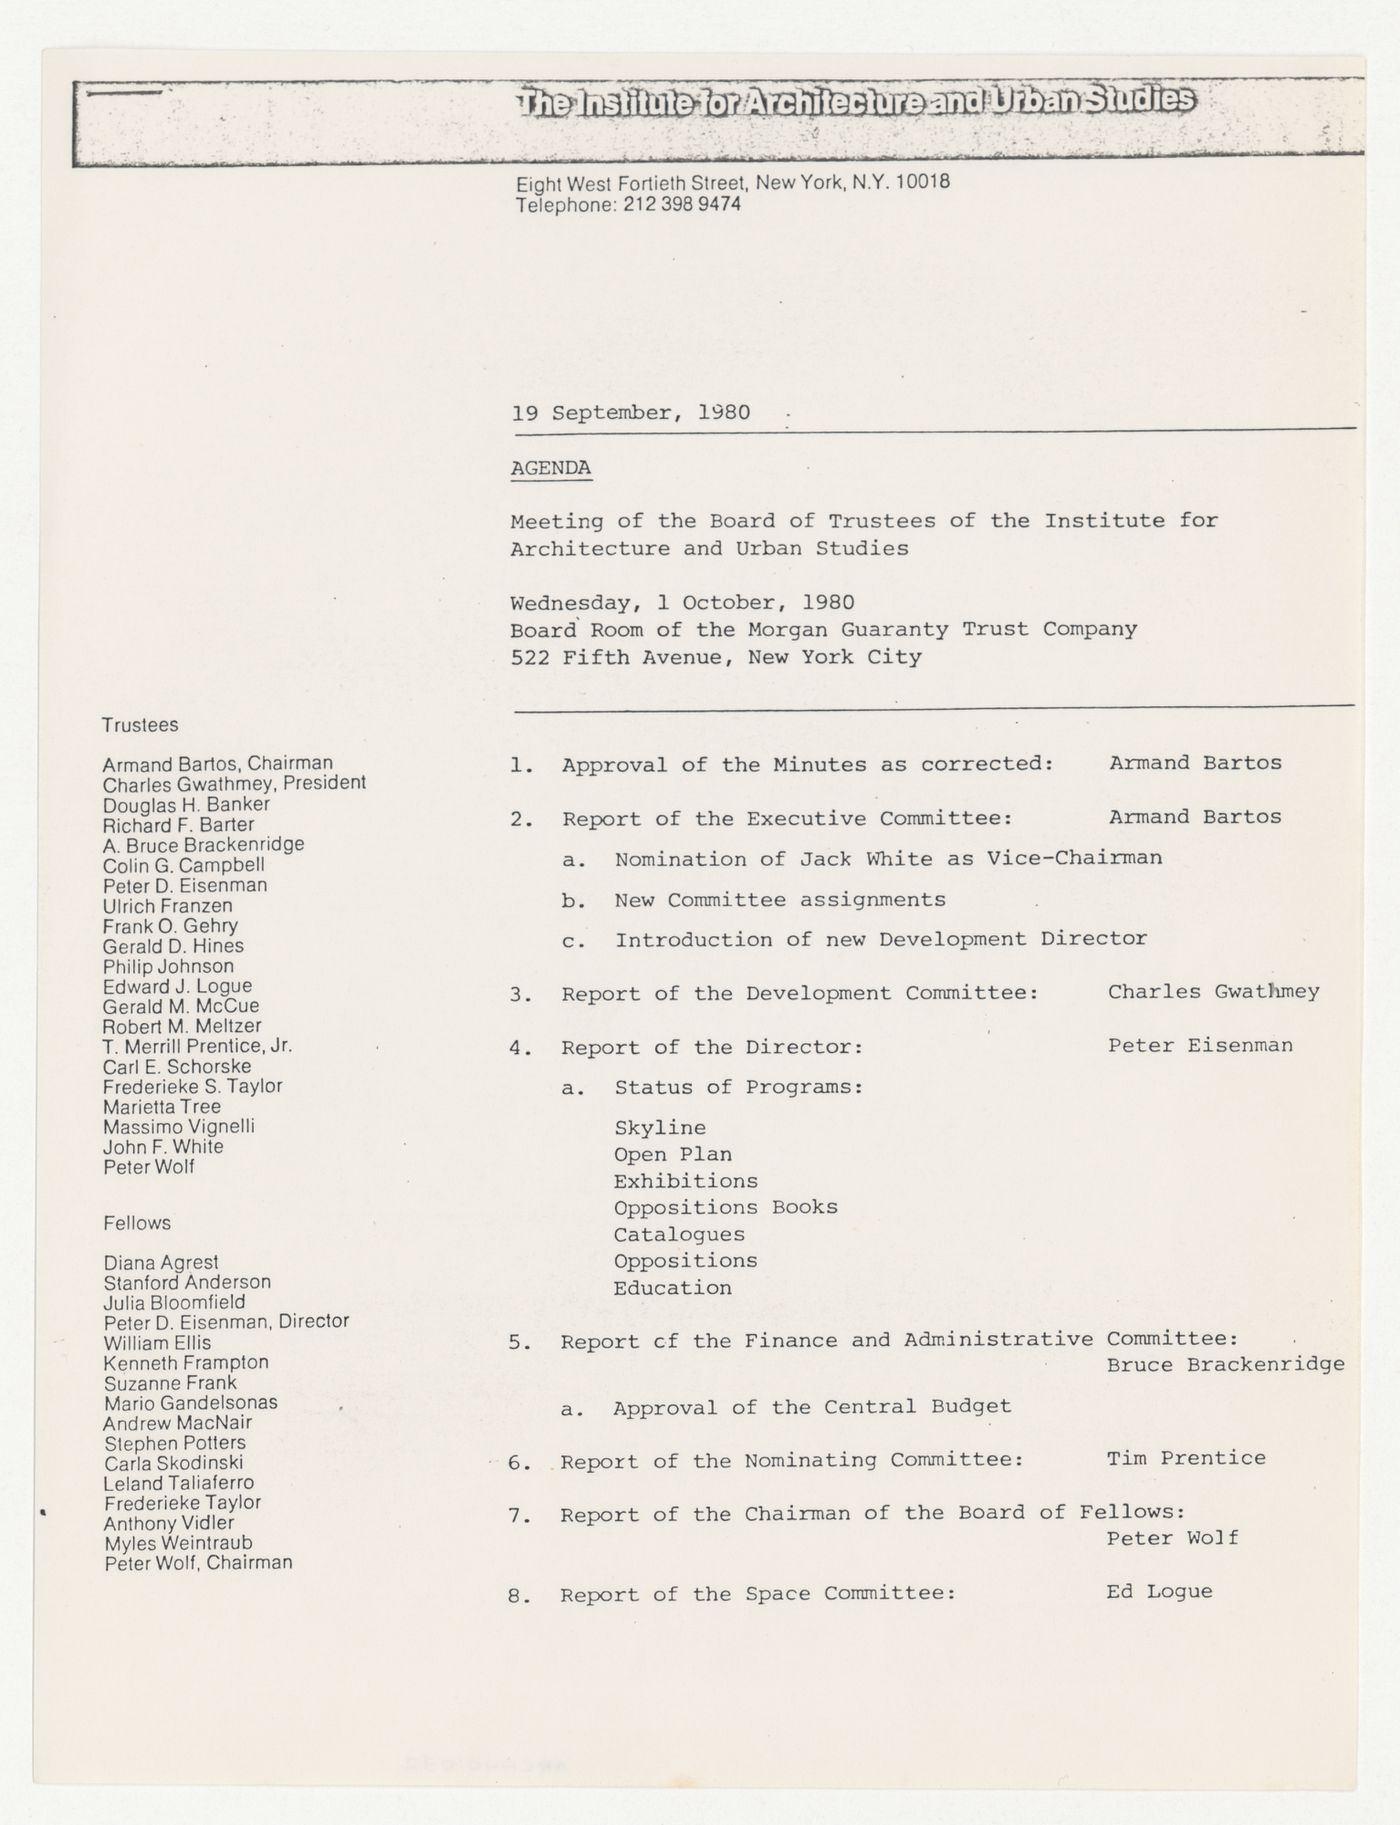 Agenda for meeting of the Board of Trustees for October 1st 1980